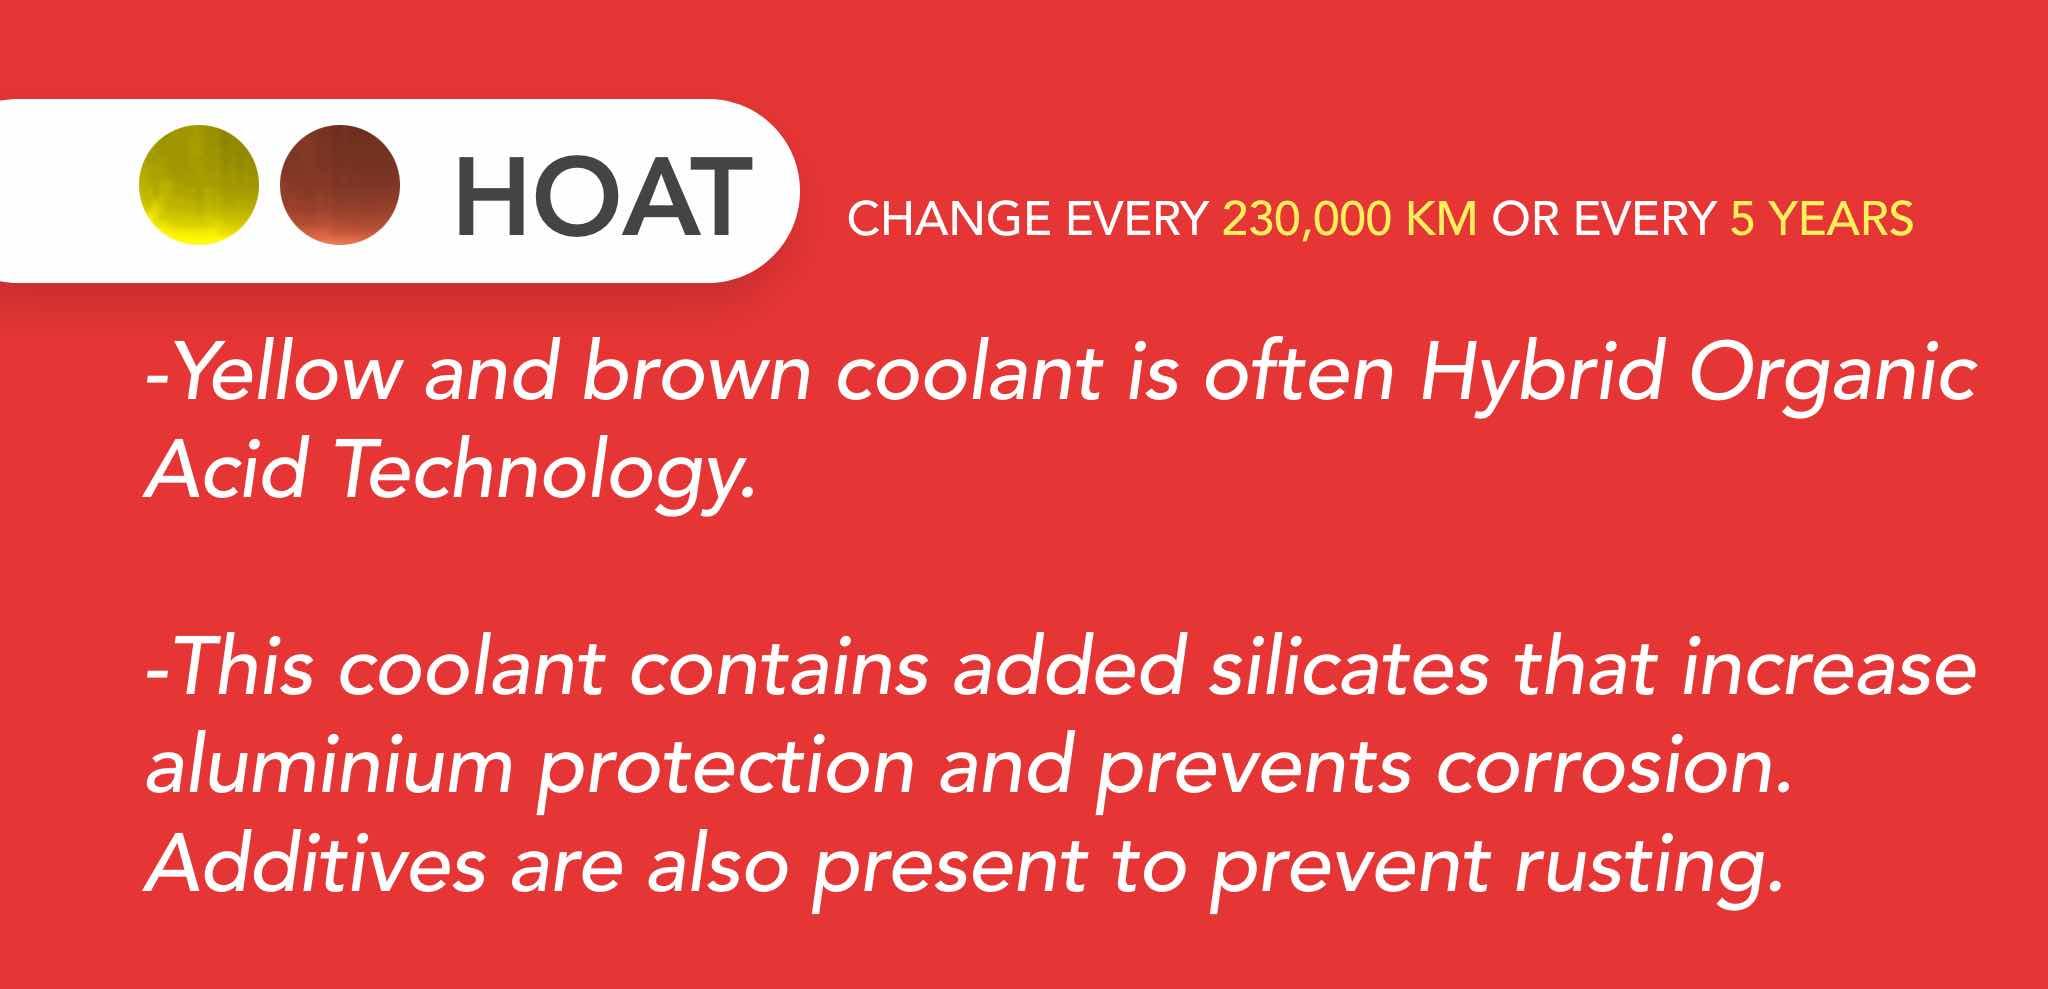 using hoat coolant in old cars